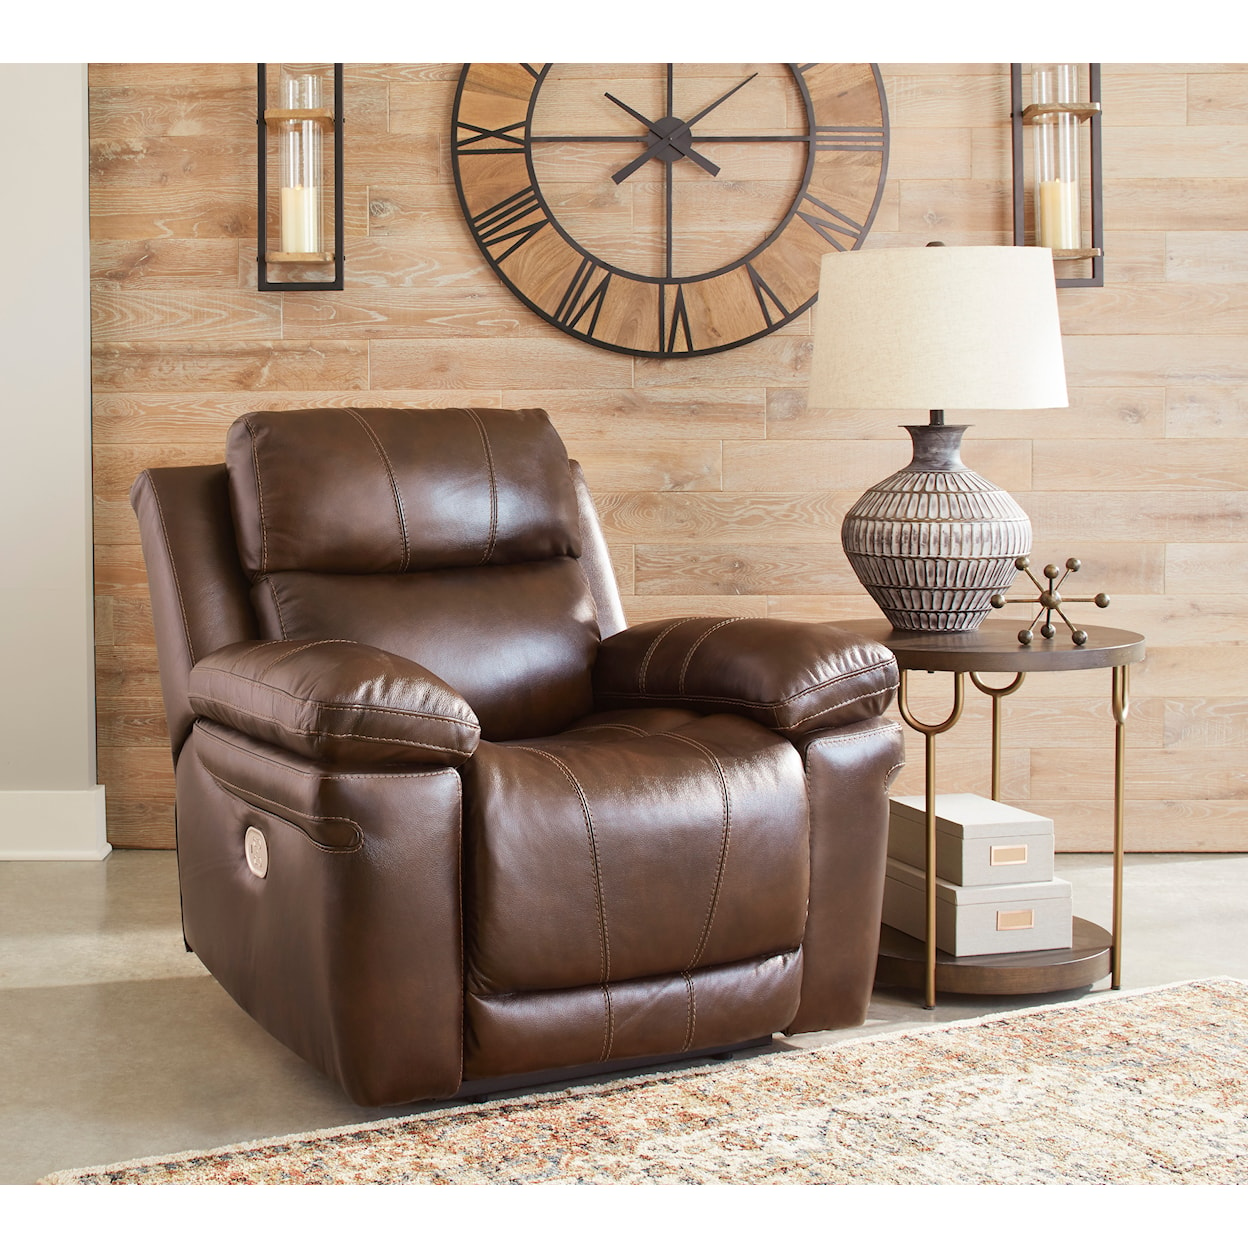 Signature Design by Ashley Furniture Edmar Power Recliner with Power Headrest